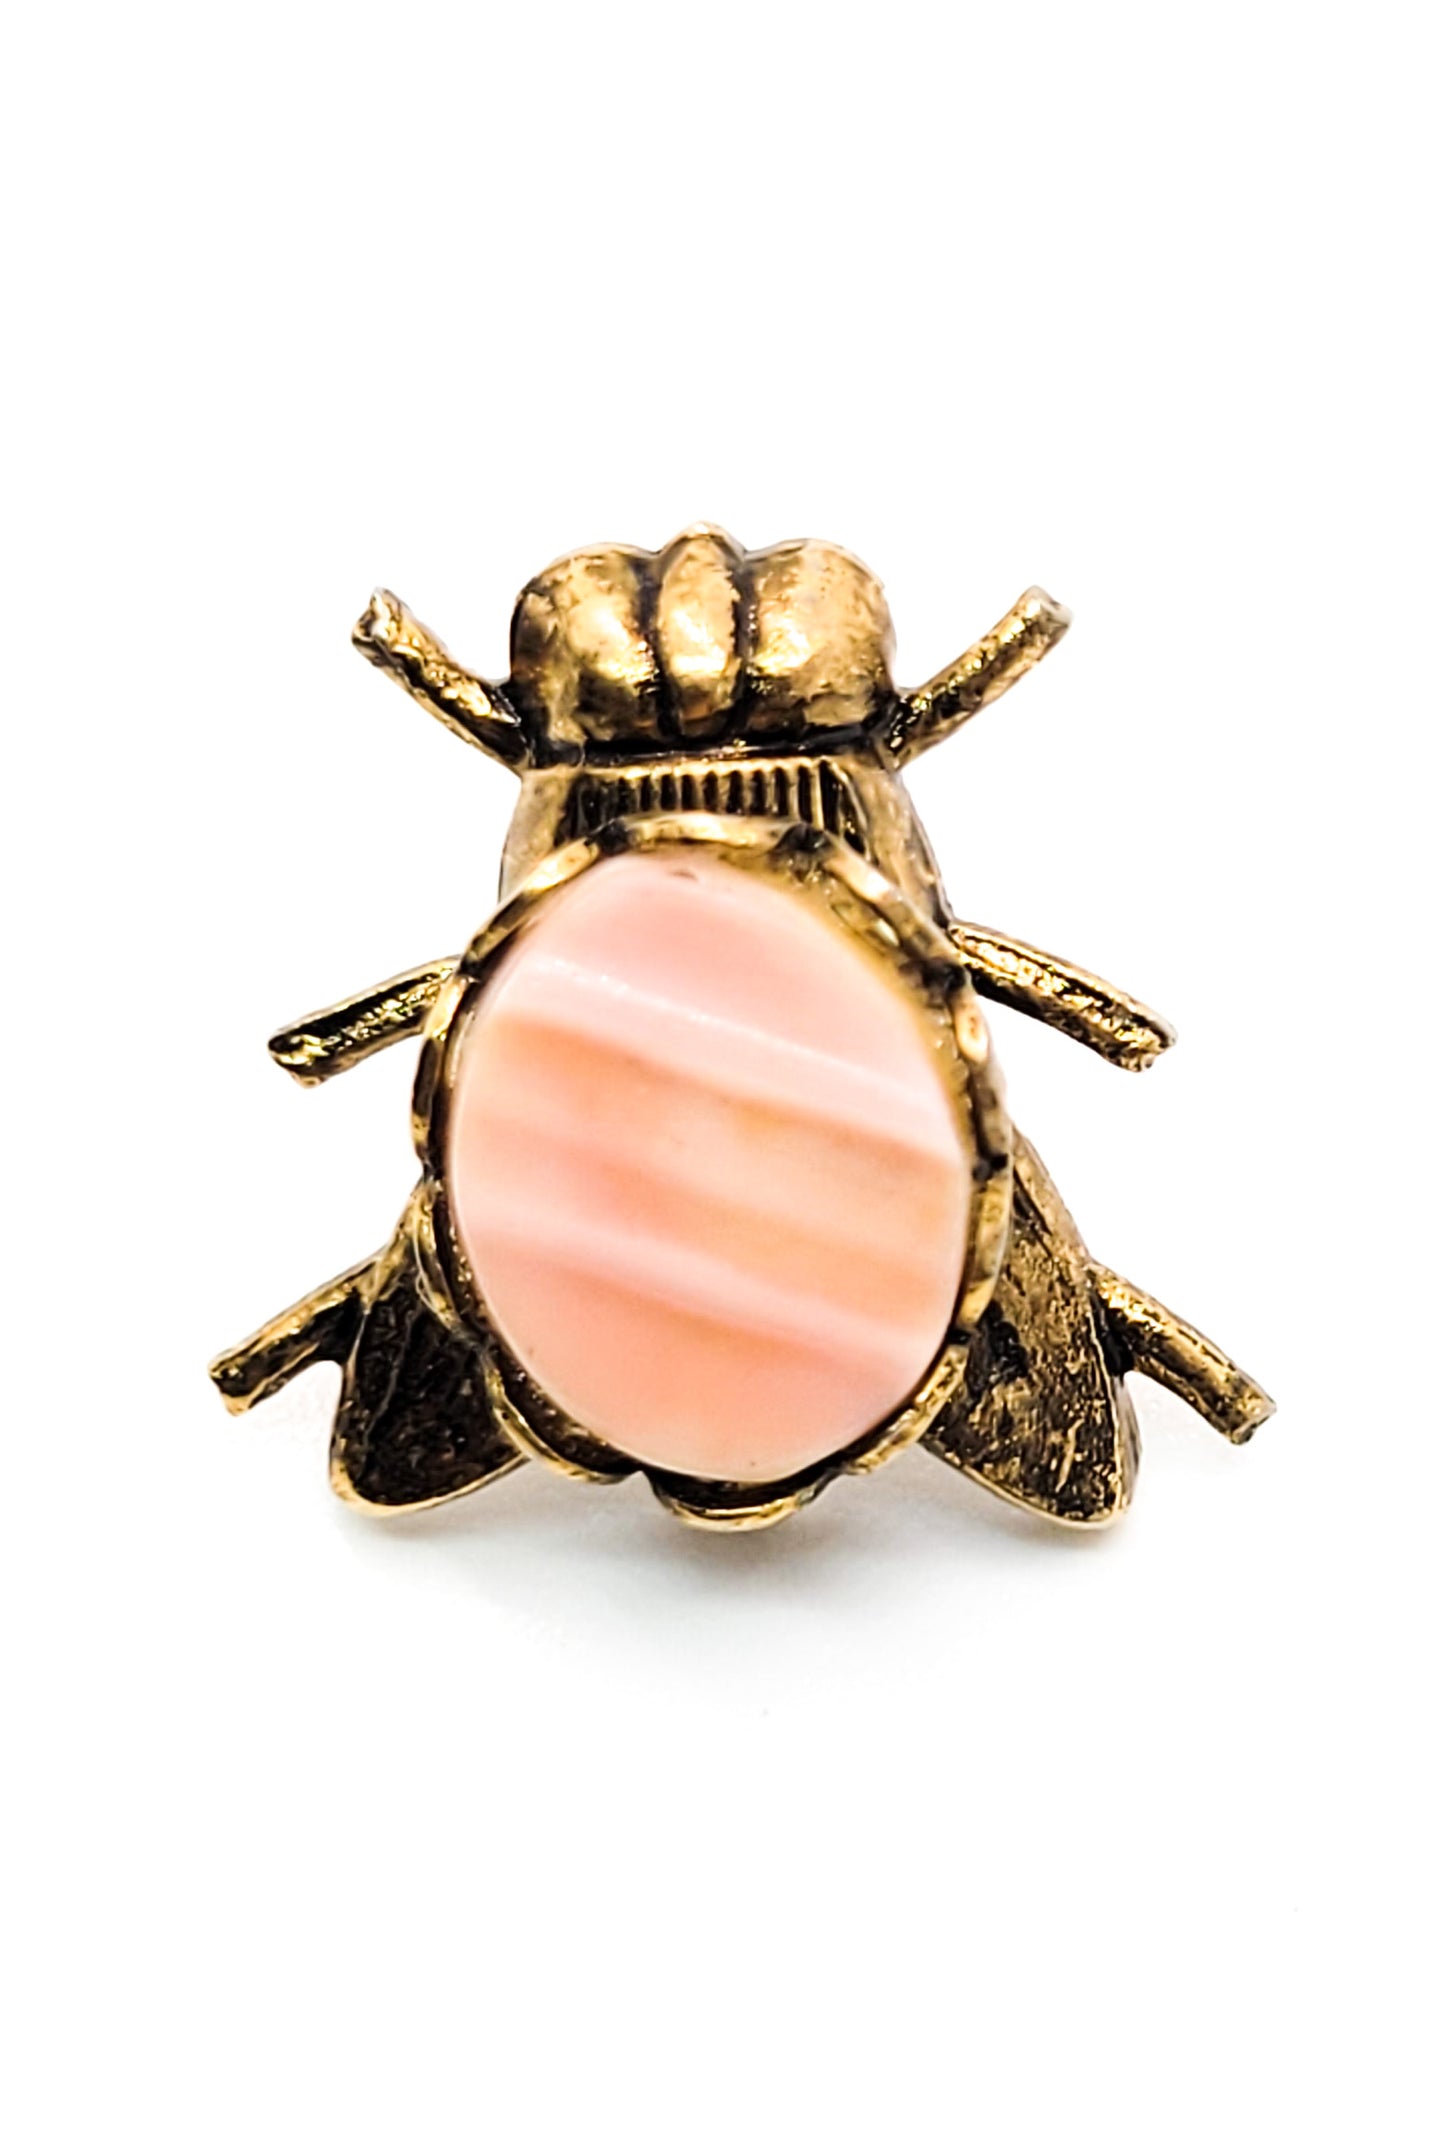 Fly golden insect molded pink wave glass vintage tie tack pin figural brooch